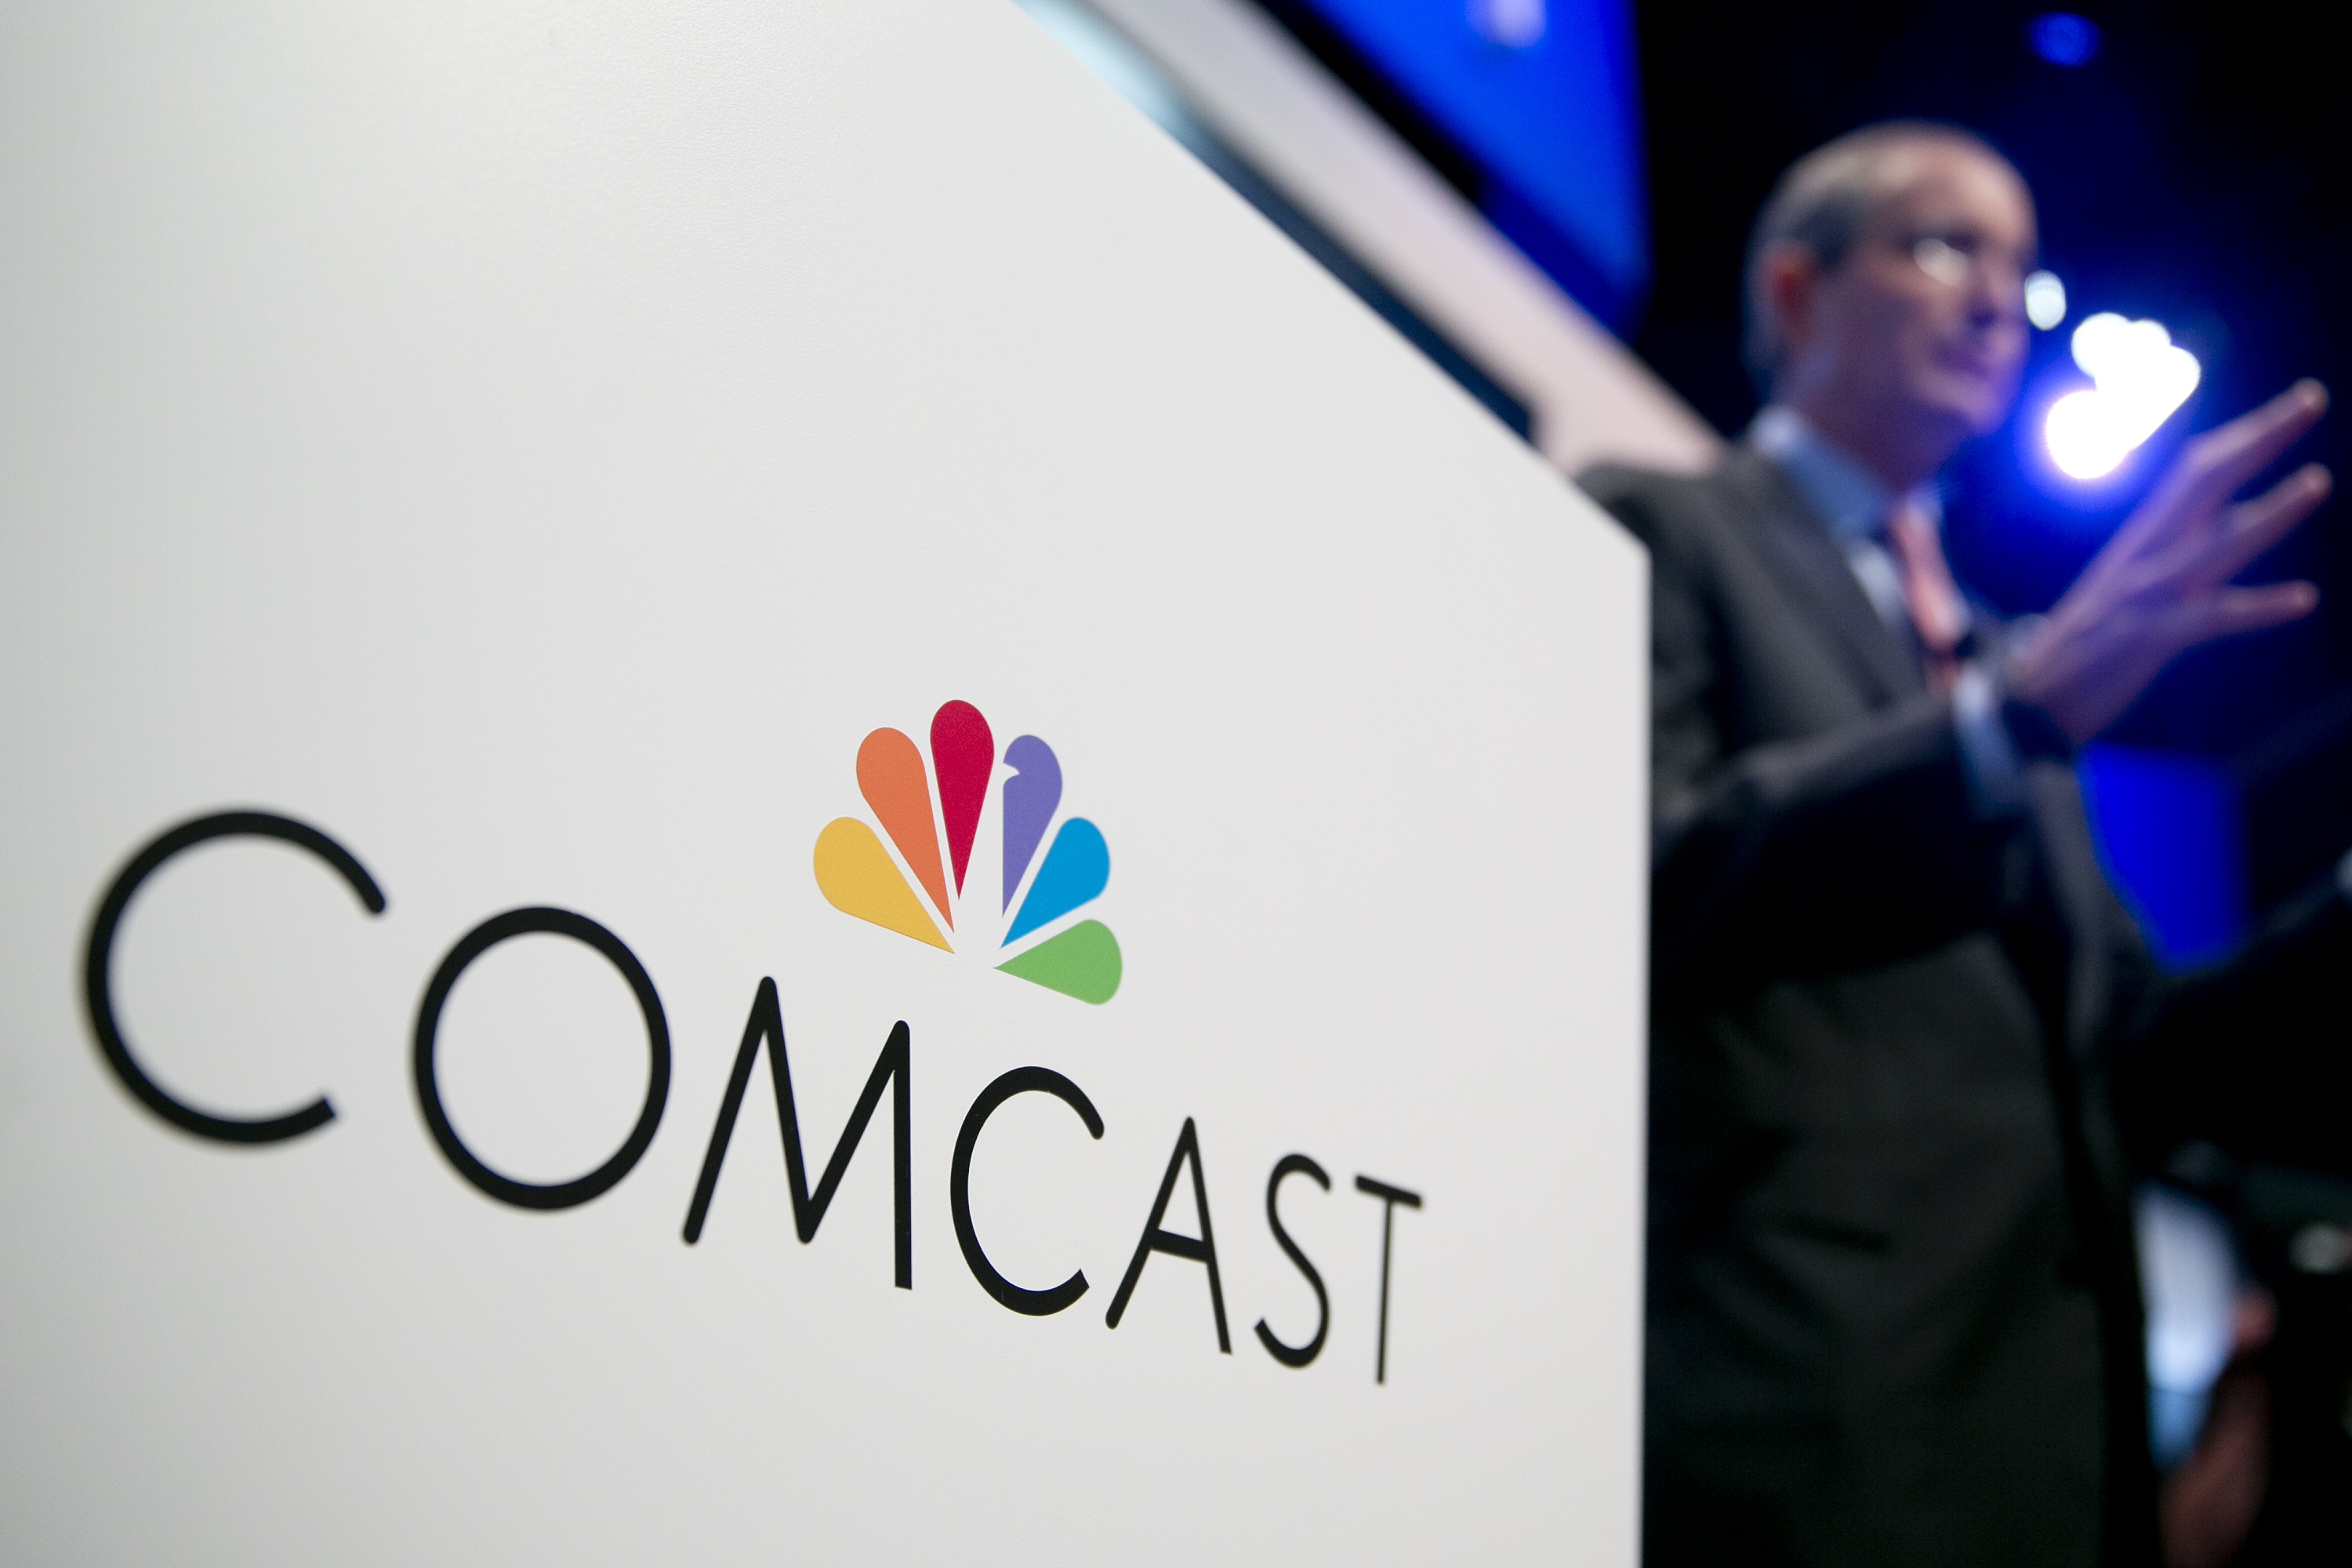 The Comcast Corp. logo is seen as Brian Roberts, chairman and chief executive officer of Comcast Corp., right, speaks during a news conference at the National Cable and Telecommunications Association (NCTA) Cable Show in Washington, D.C., U.S., on Tuesday, June 11, 2013. (Bloomberg&mdash;Bloomberg via Getty Images)